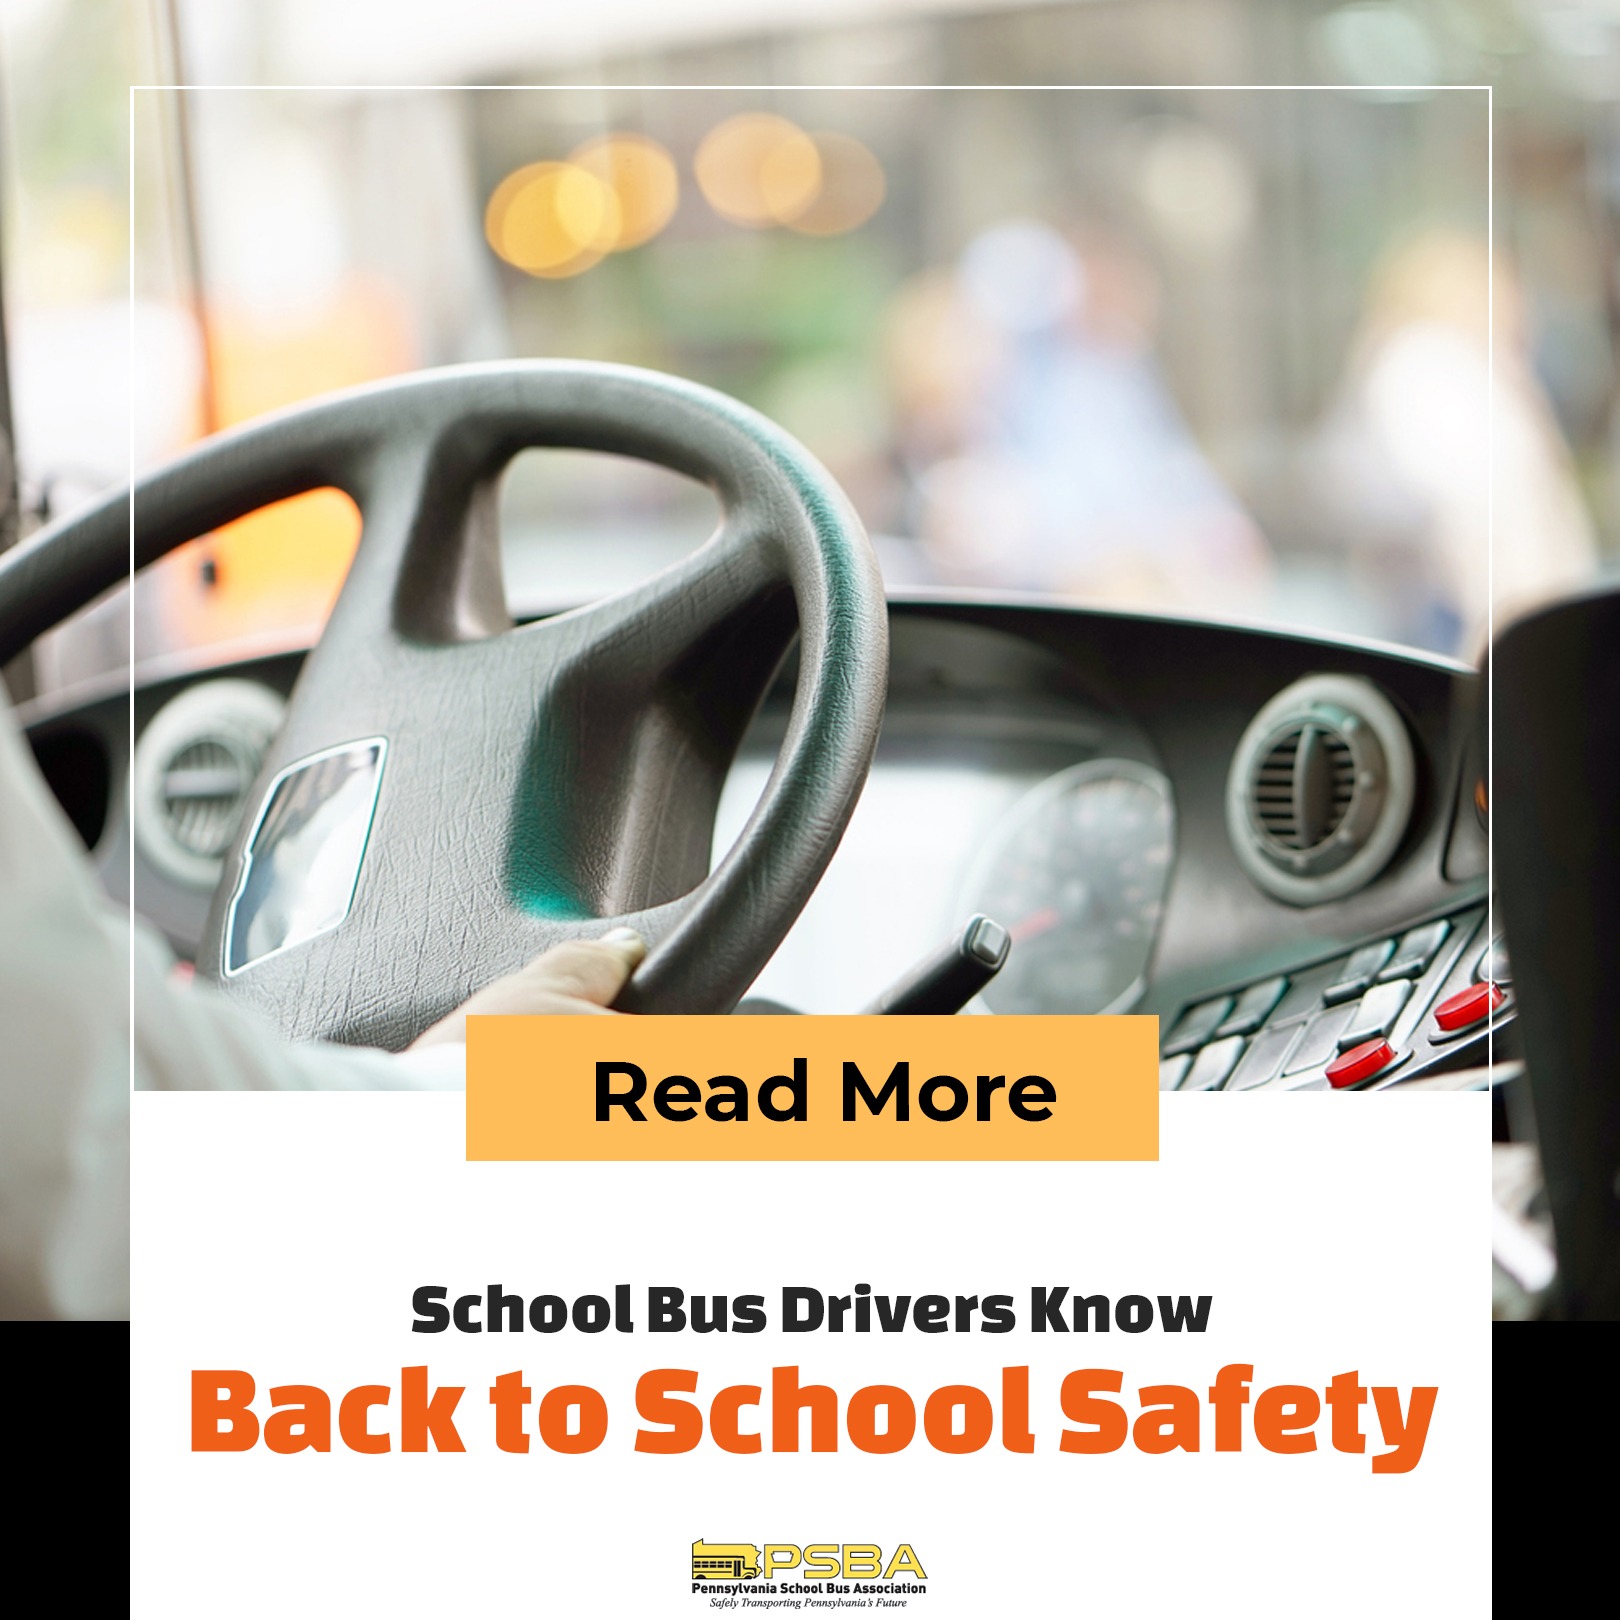 School Bus Drivers Know Back to School Safety